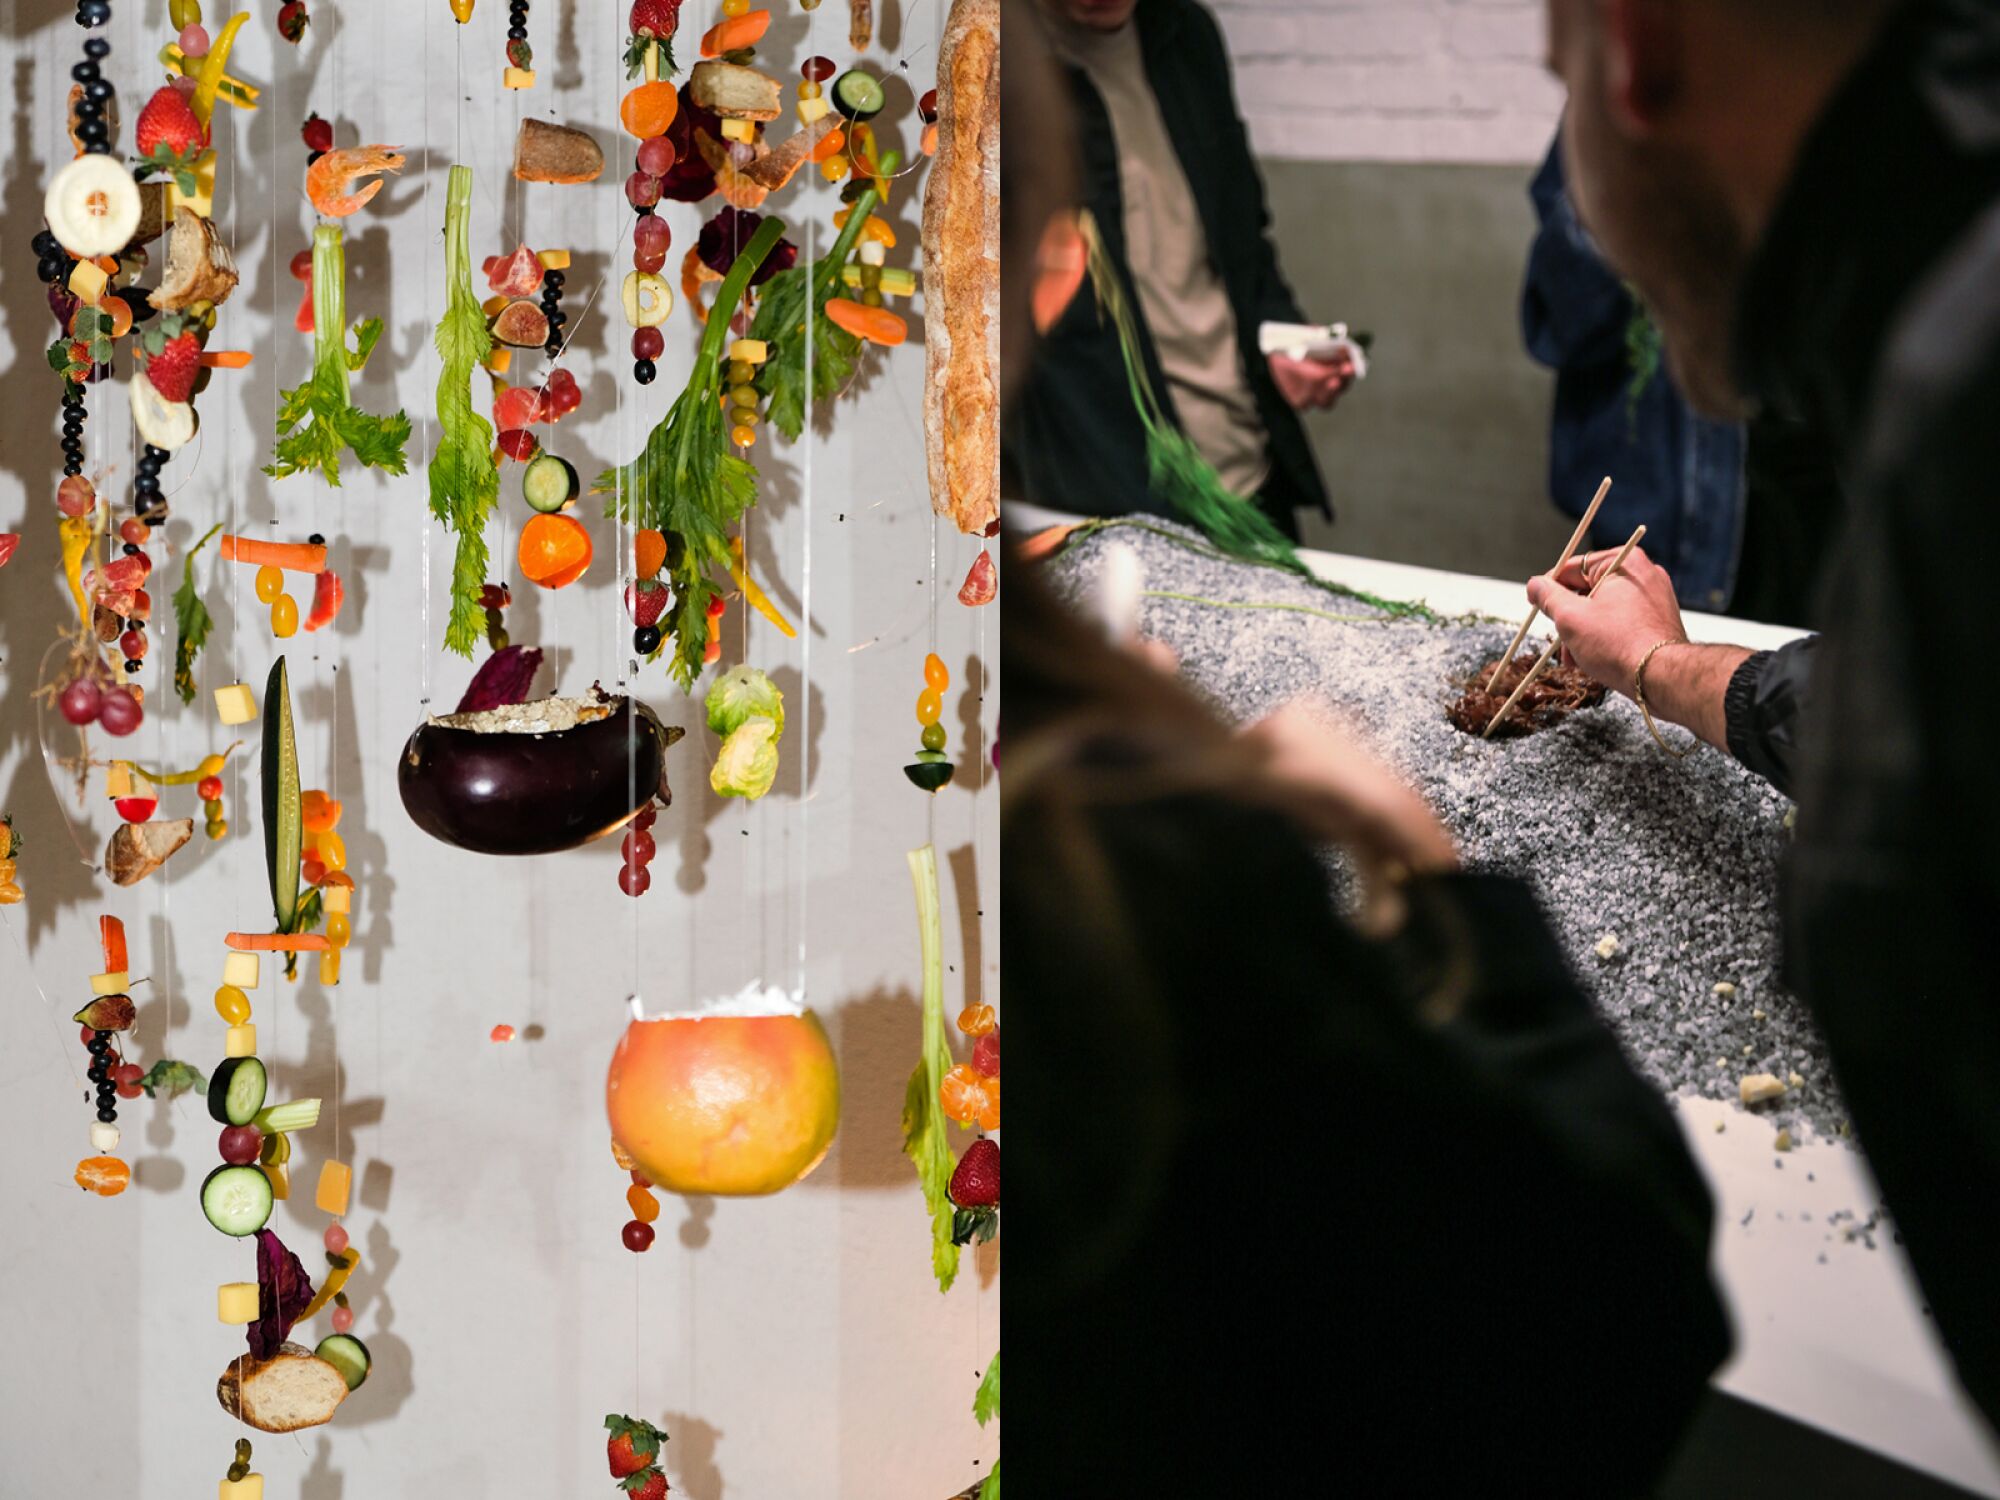 Side by side images of a hanging food installation and a person reaching into a volcano-like exhibition with chopsticks